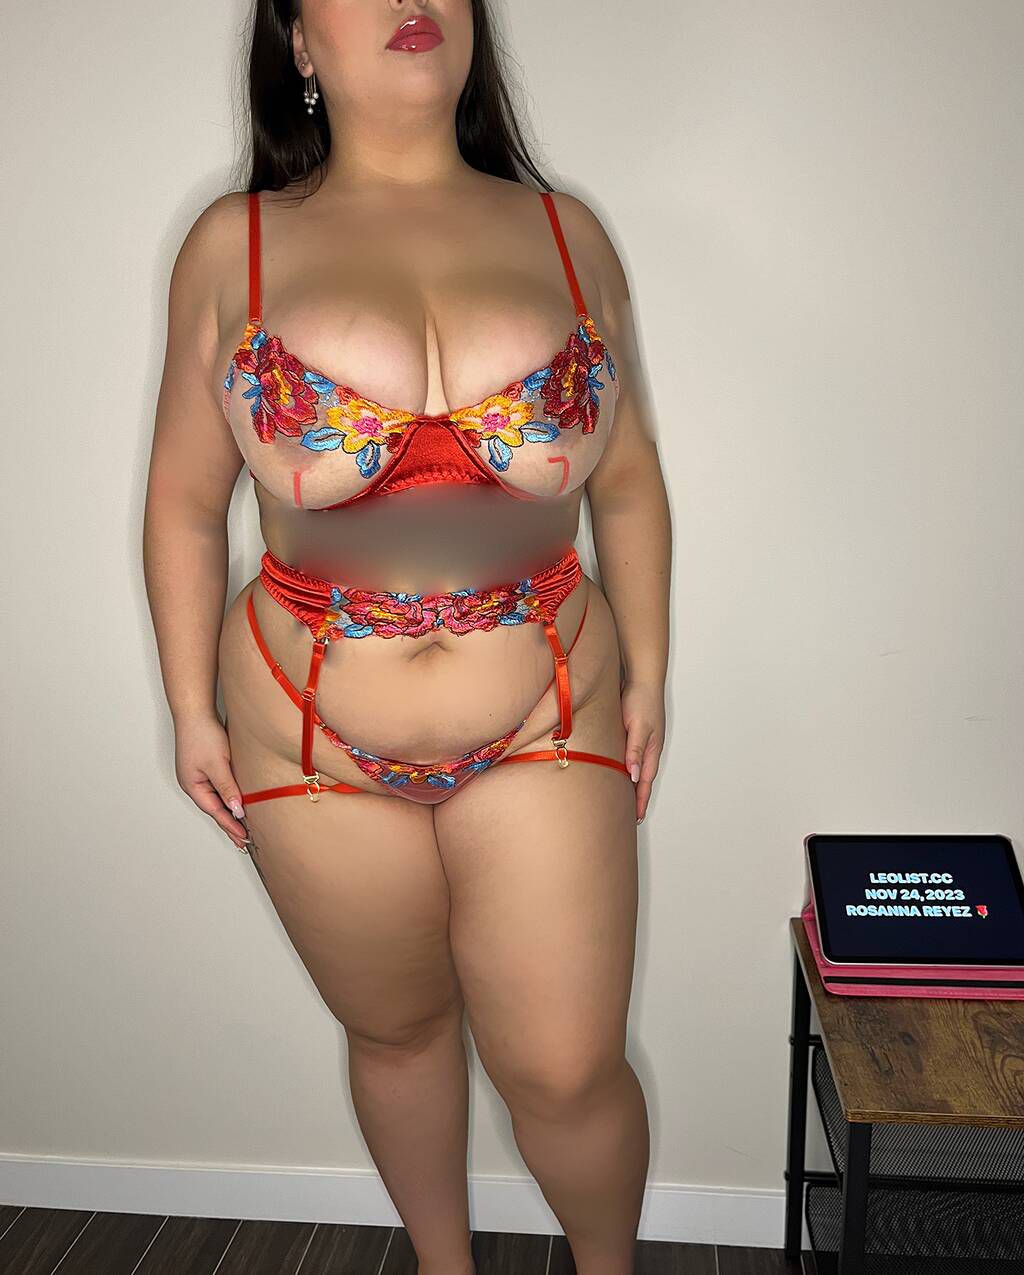 Escorts Vancouver, British Columbia AVAILABLE TODAY! GASTOWN//ALL NATURAL CURVY PRINCESS